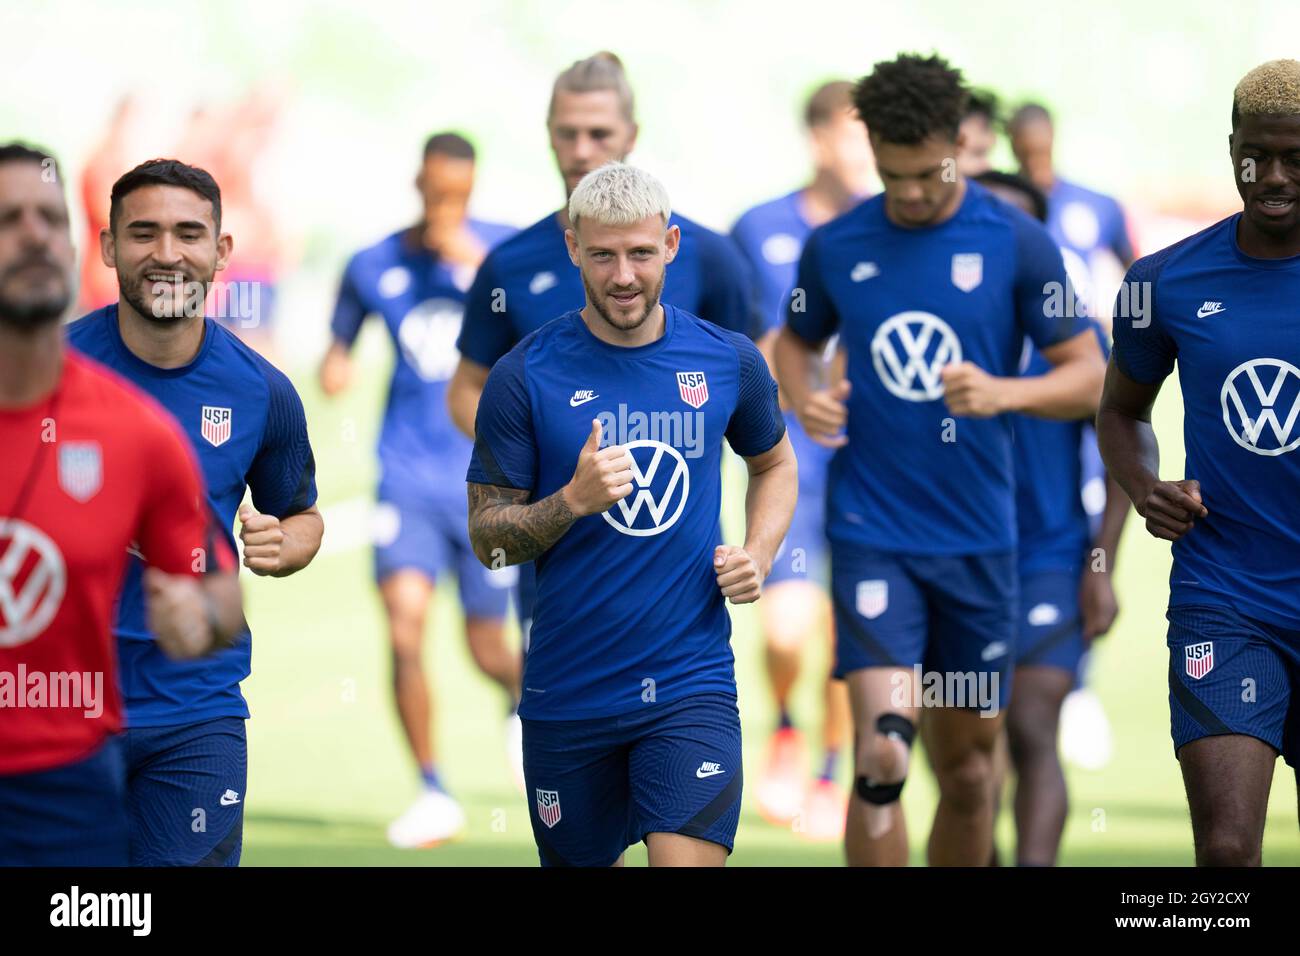 Austin, Texas, USA. 6th October, 2021. Members of the United States Men's National Team (USMNT) warm up for practice at Austin's Q2 stadium on Wednesday, October 6, 2021. The U.S. team will face Jamaica on Thursday in a World Cup qualifying match. Credit: Bob Daemmrich/Alamy Live News Stock Photo